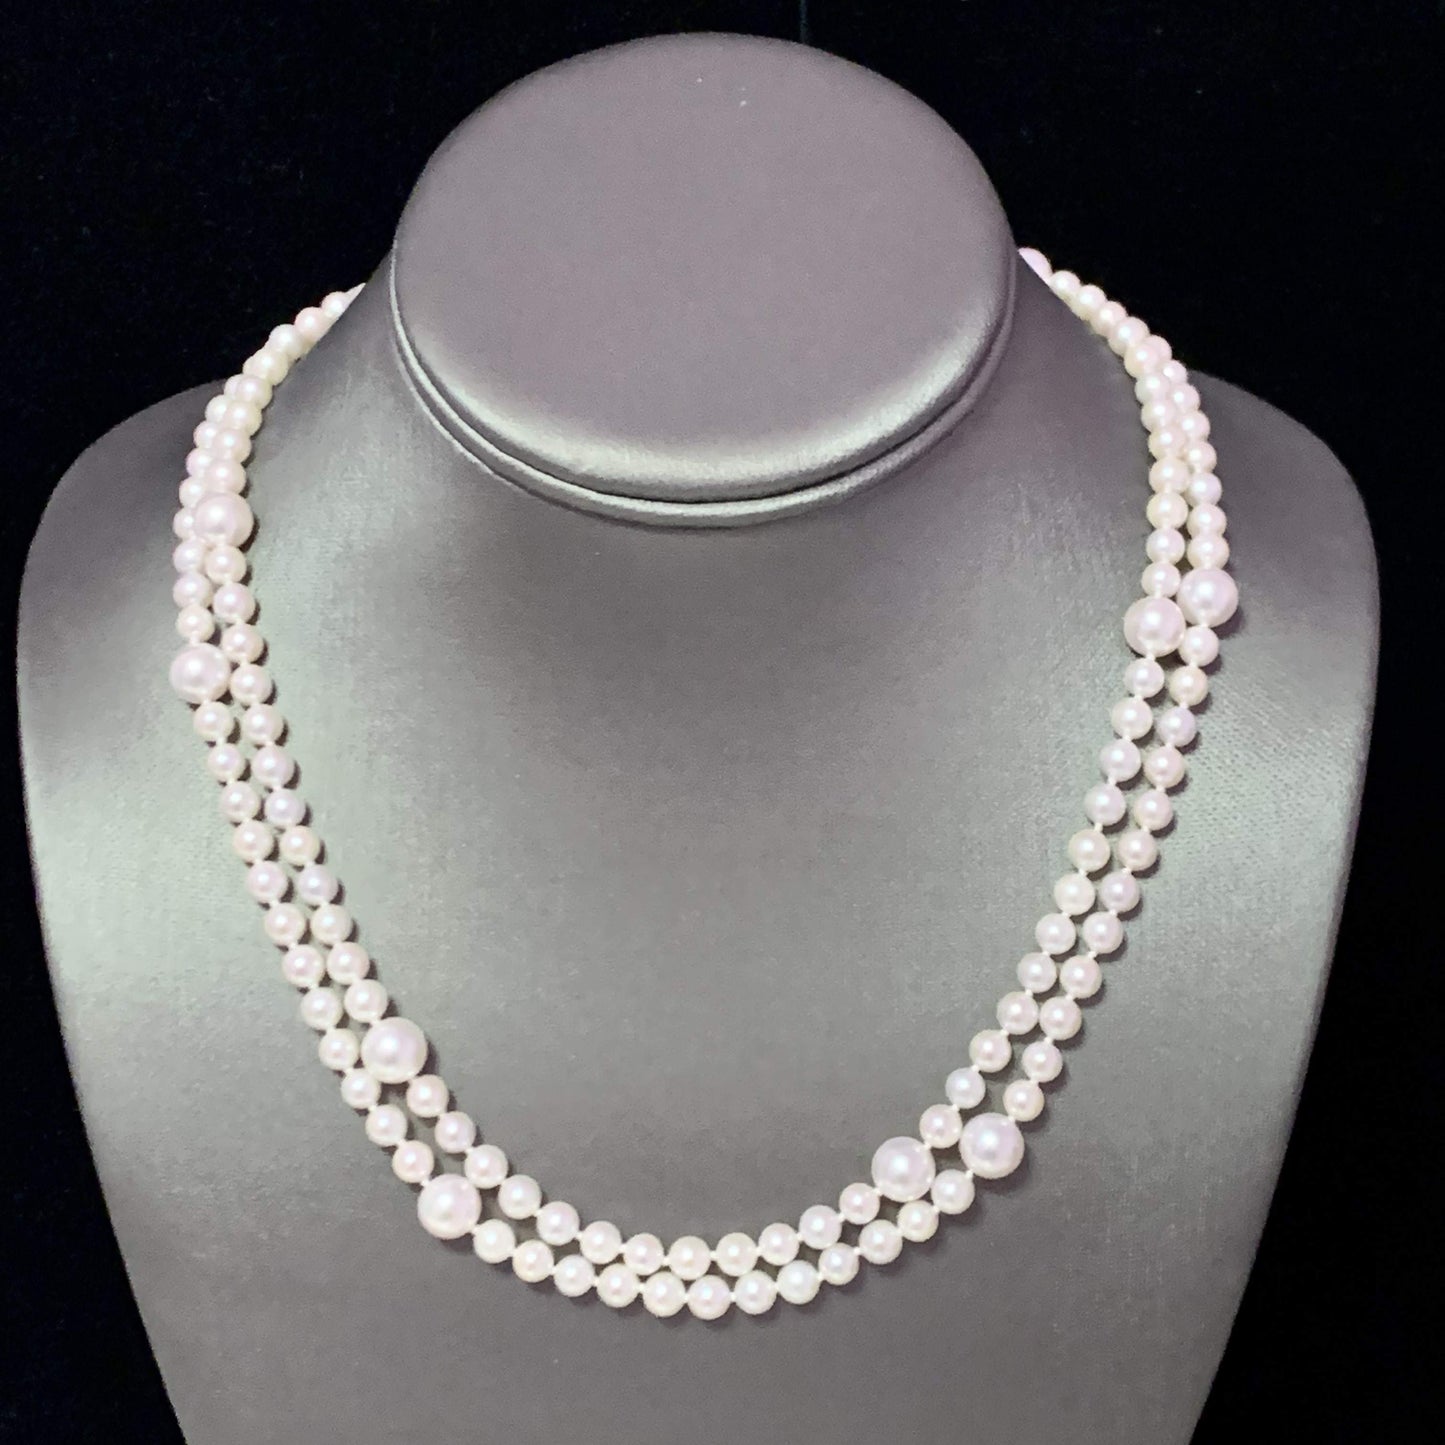 Akoya Pearl Necklace 14k Yellow Gold 37.25" 8.5 mm Certified $5,950 114457 - Certified Estate Jewelry